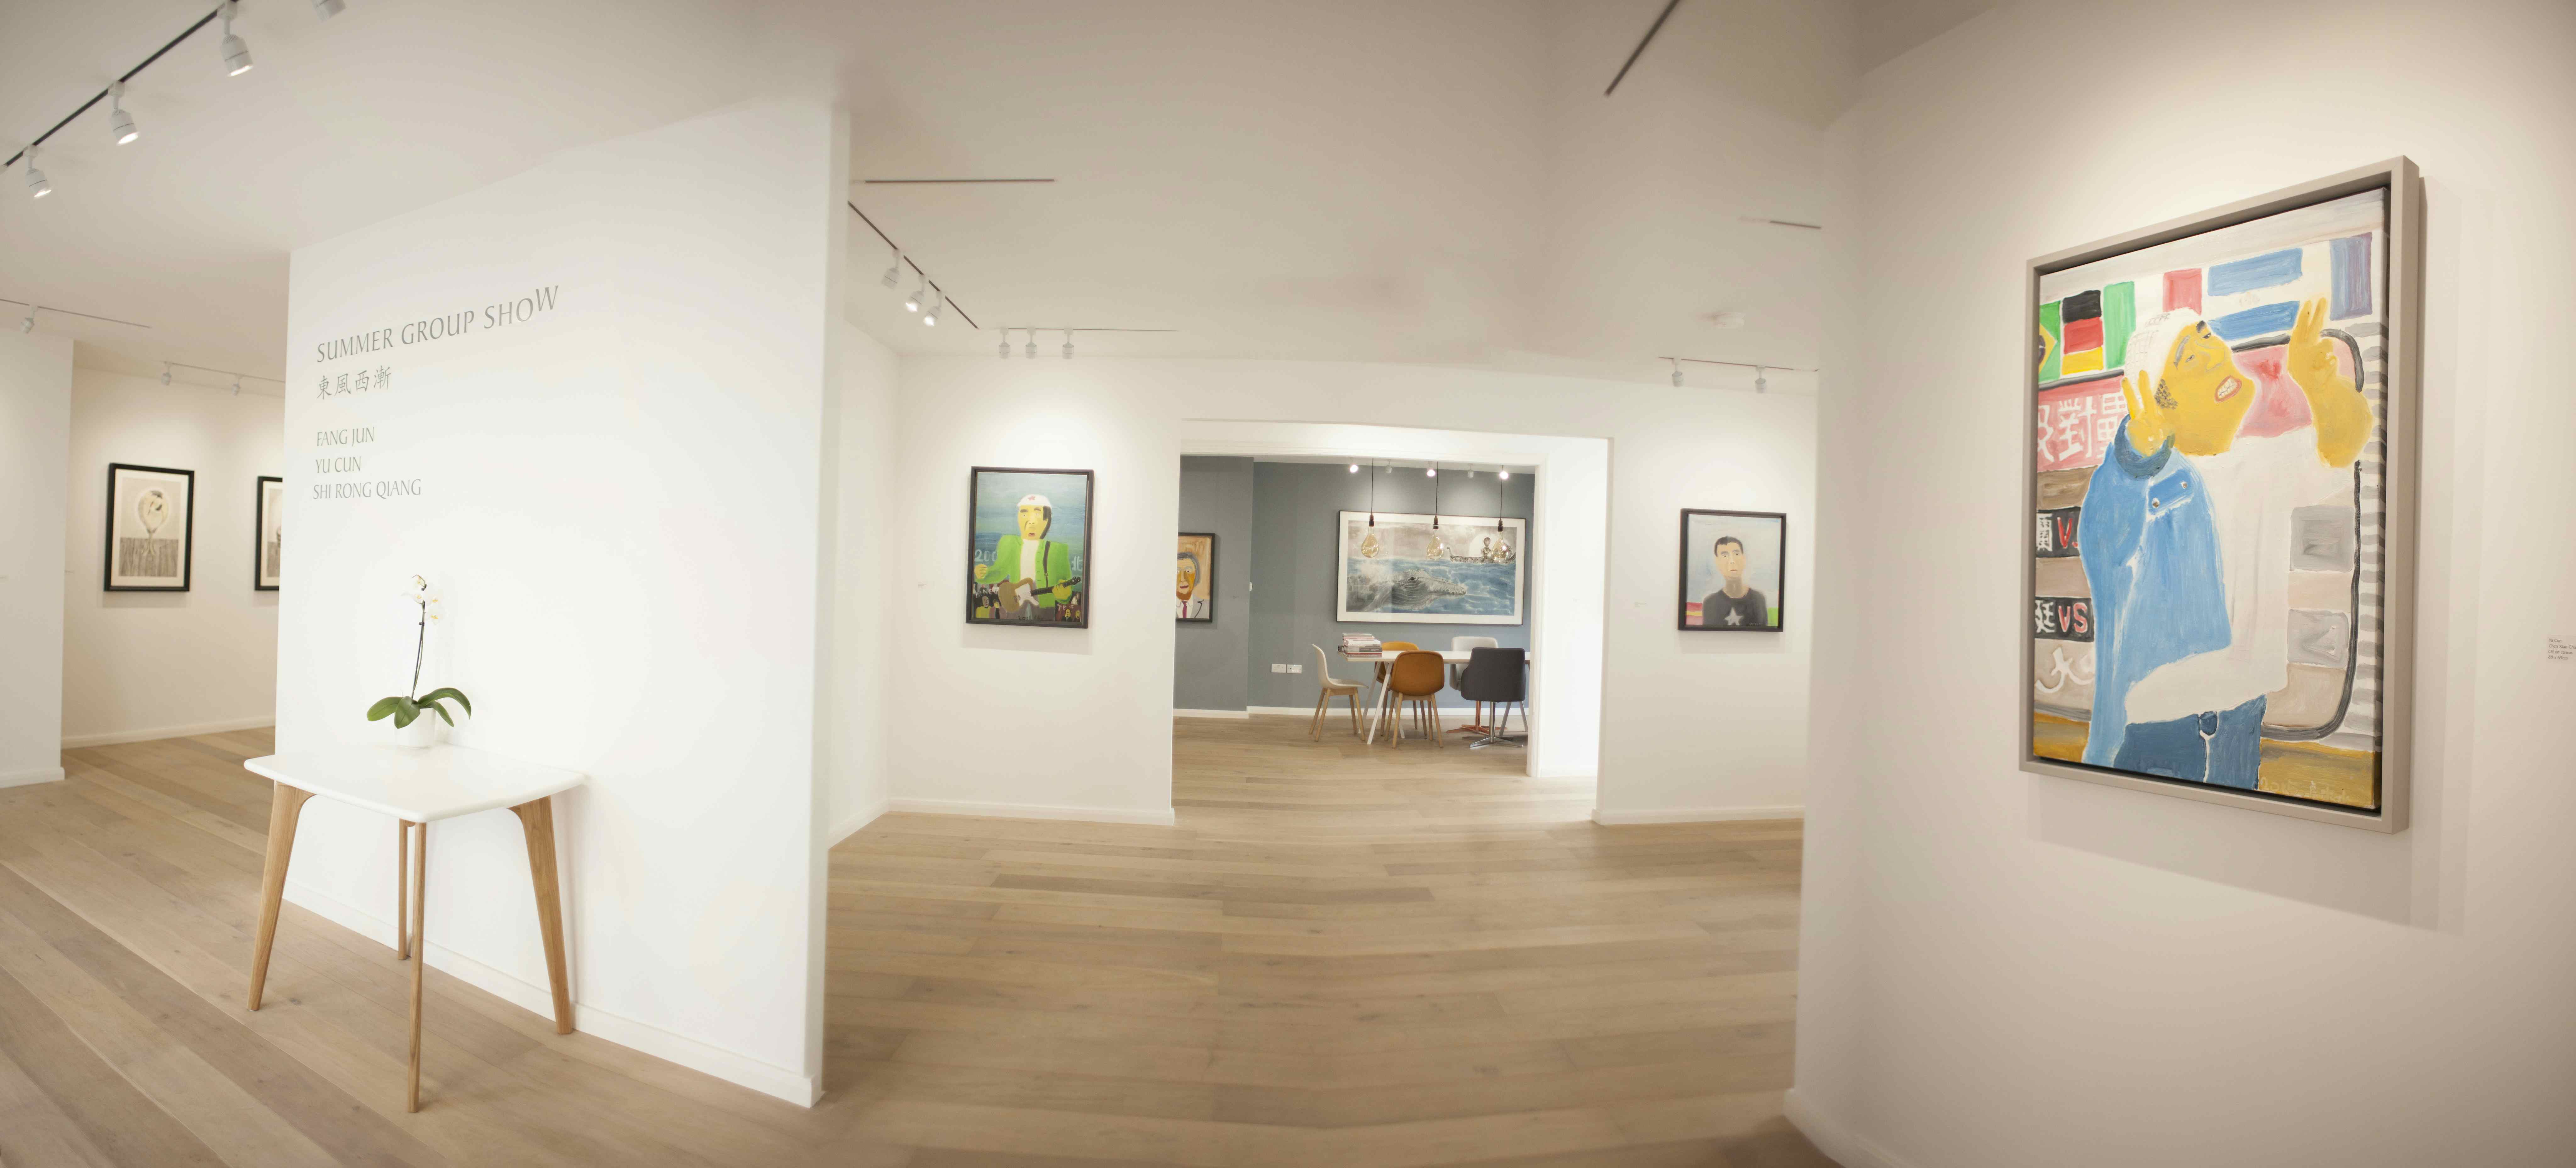 Gallery space, Arthill Gallery